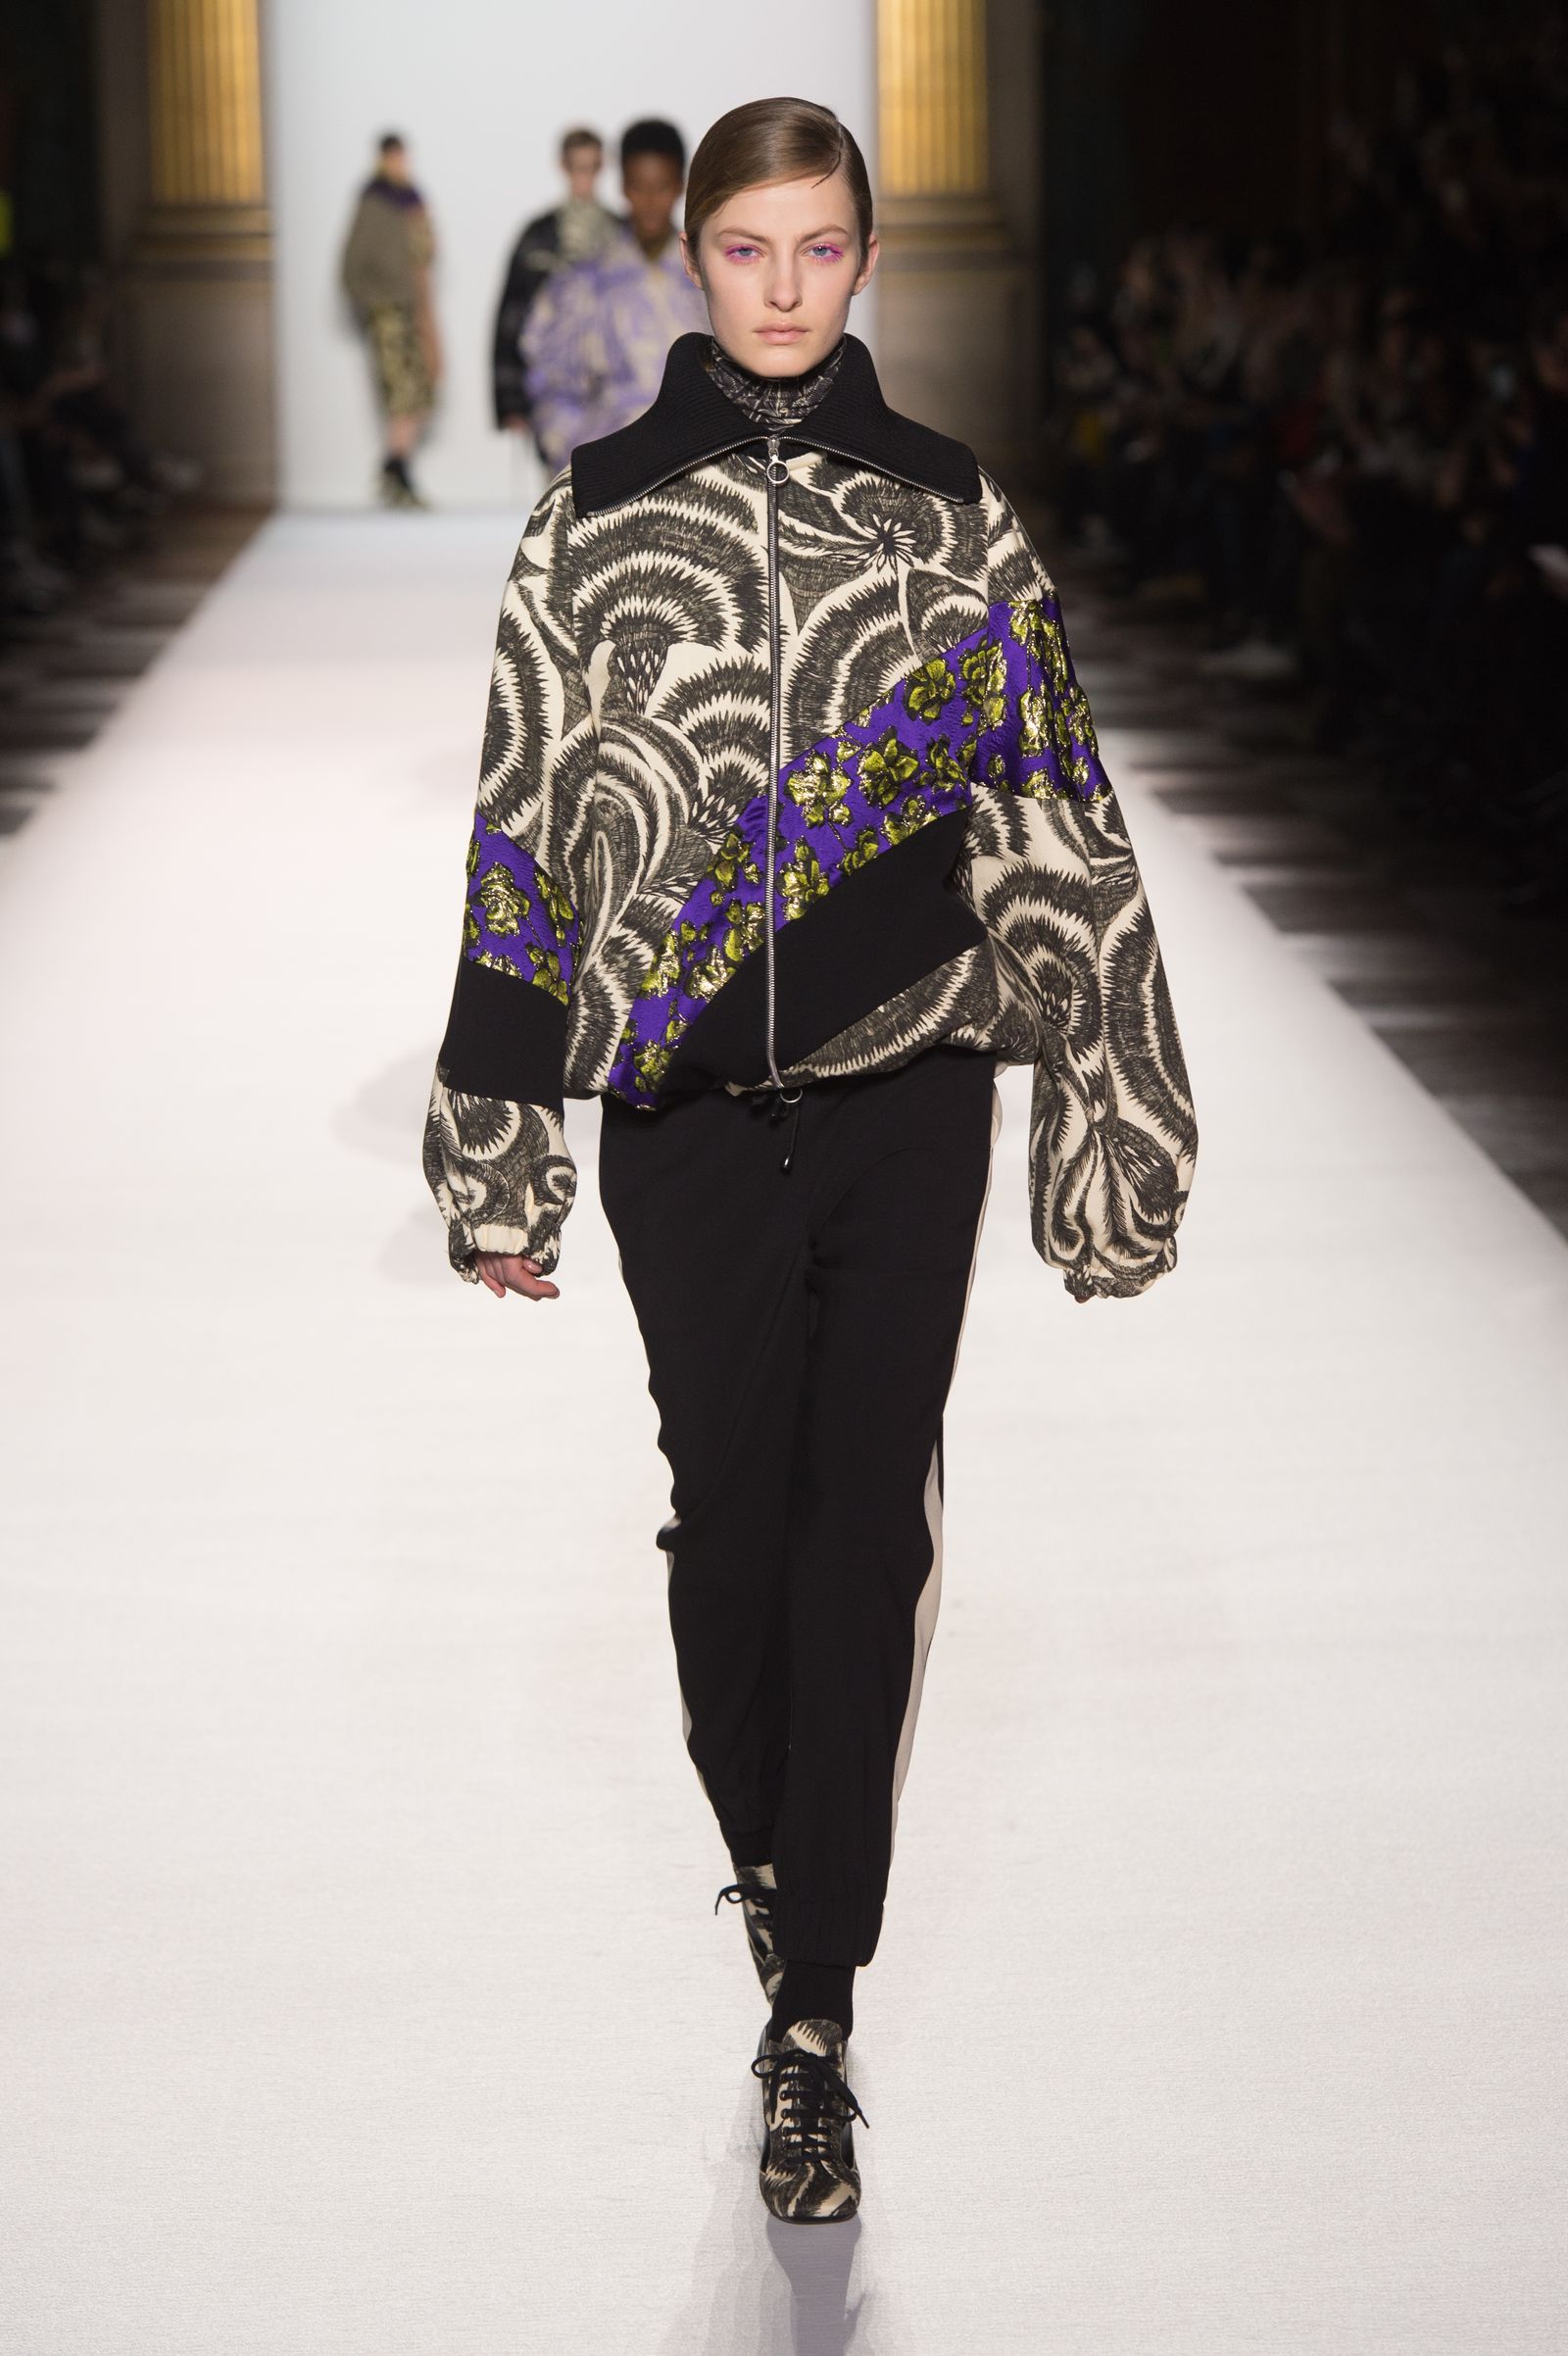 Dries Van Noten Fall 2018 Had the Dreamiest Spring Jackets | Who What Wear